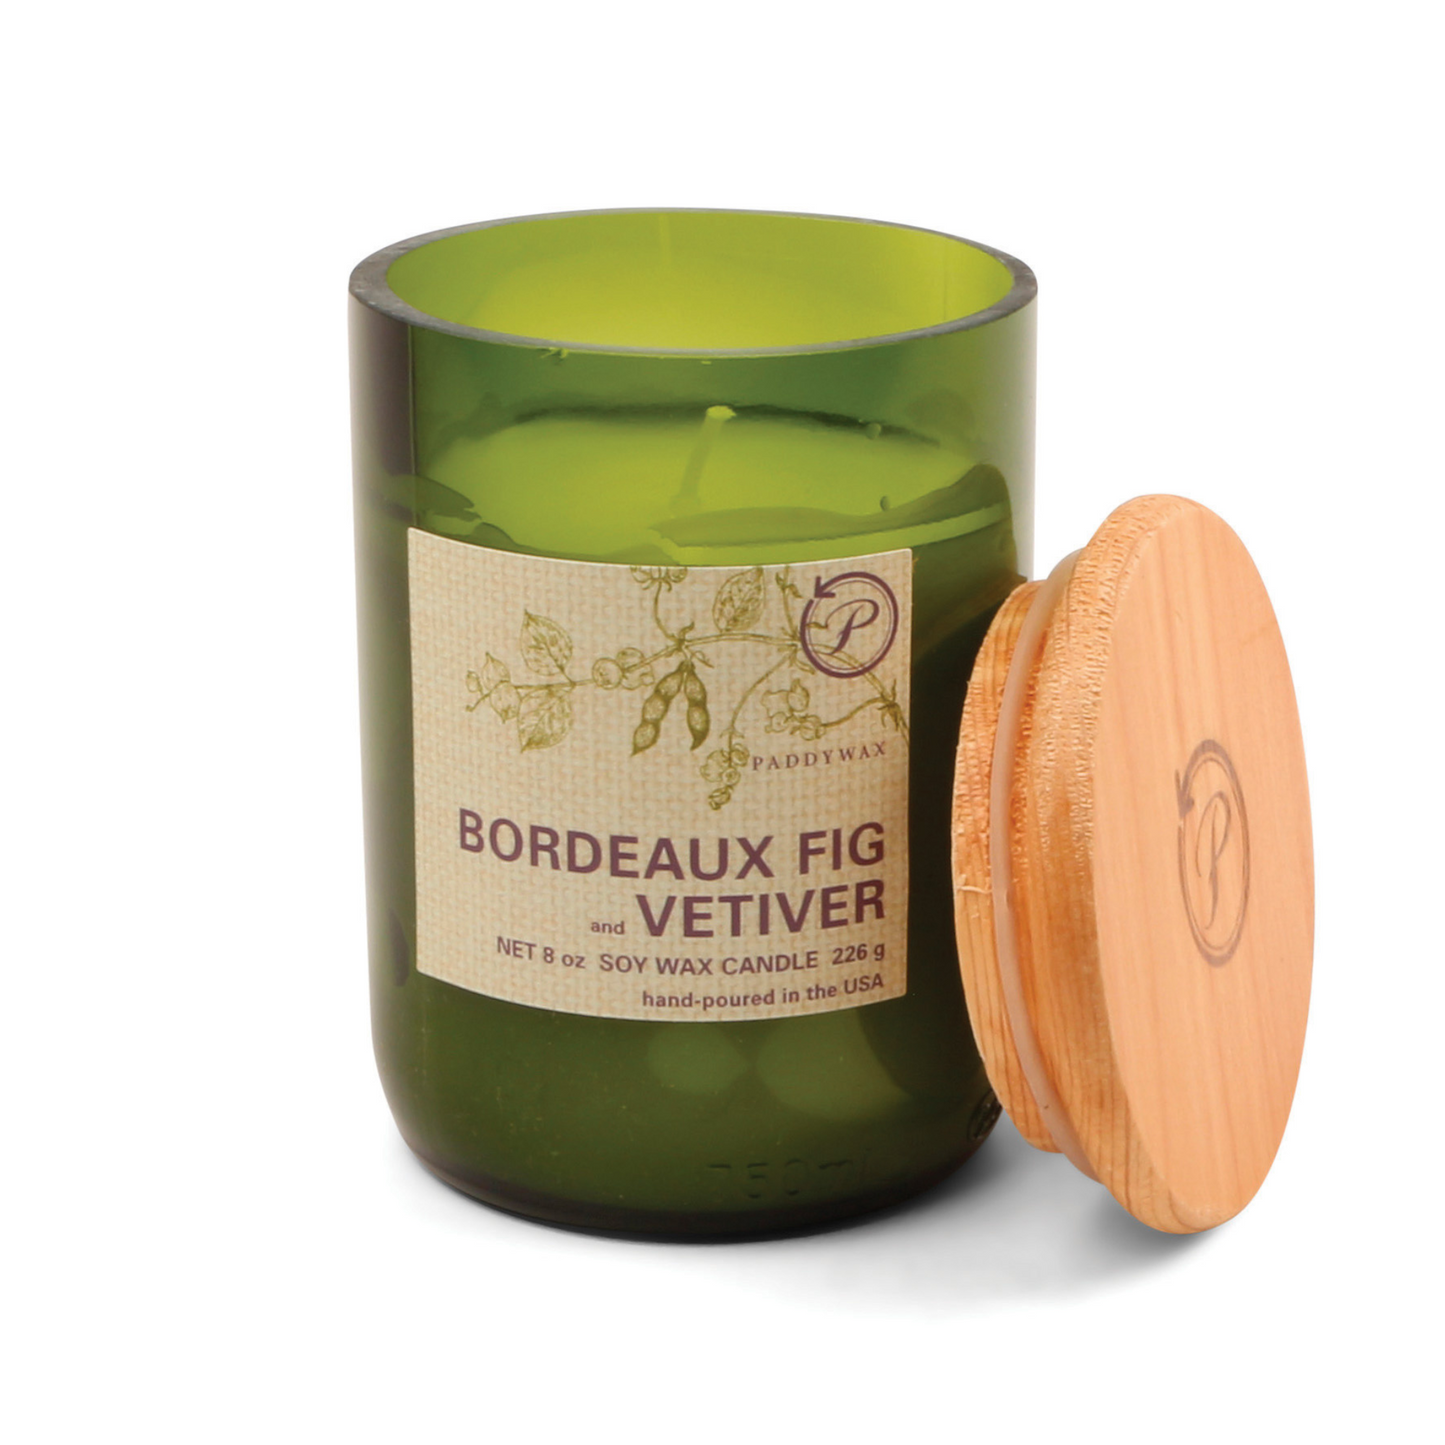 Green glass candle with a wooden lid and printed sticker on the front.